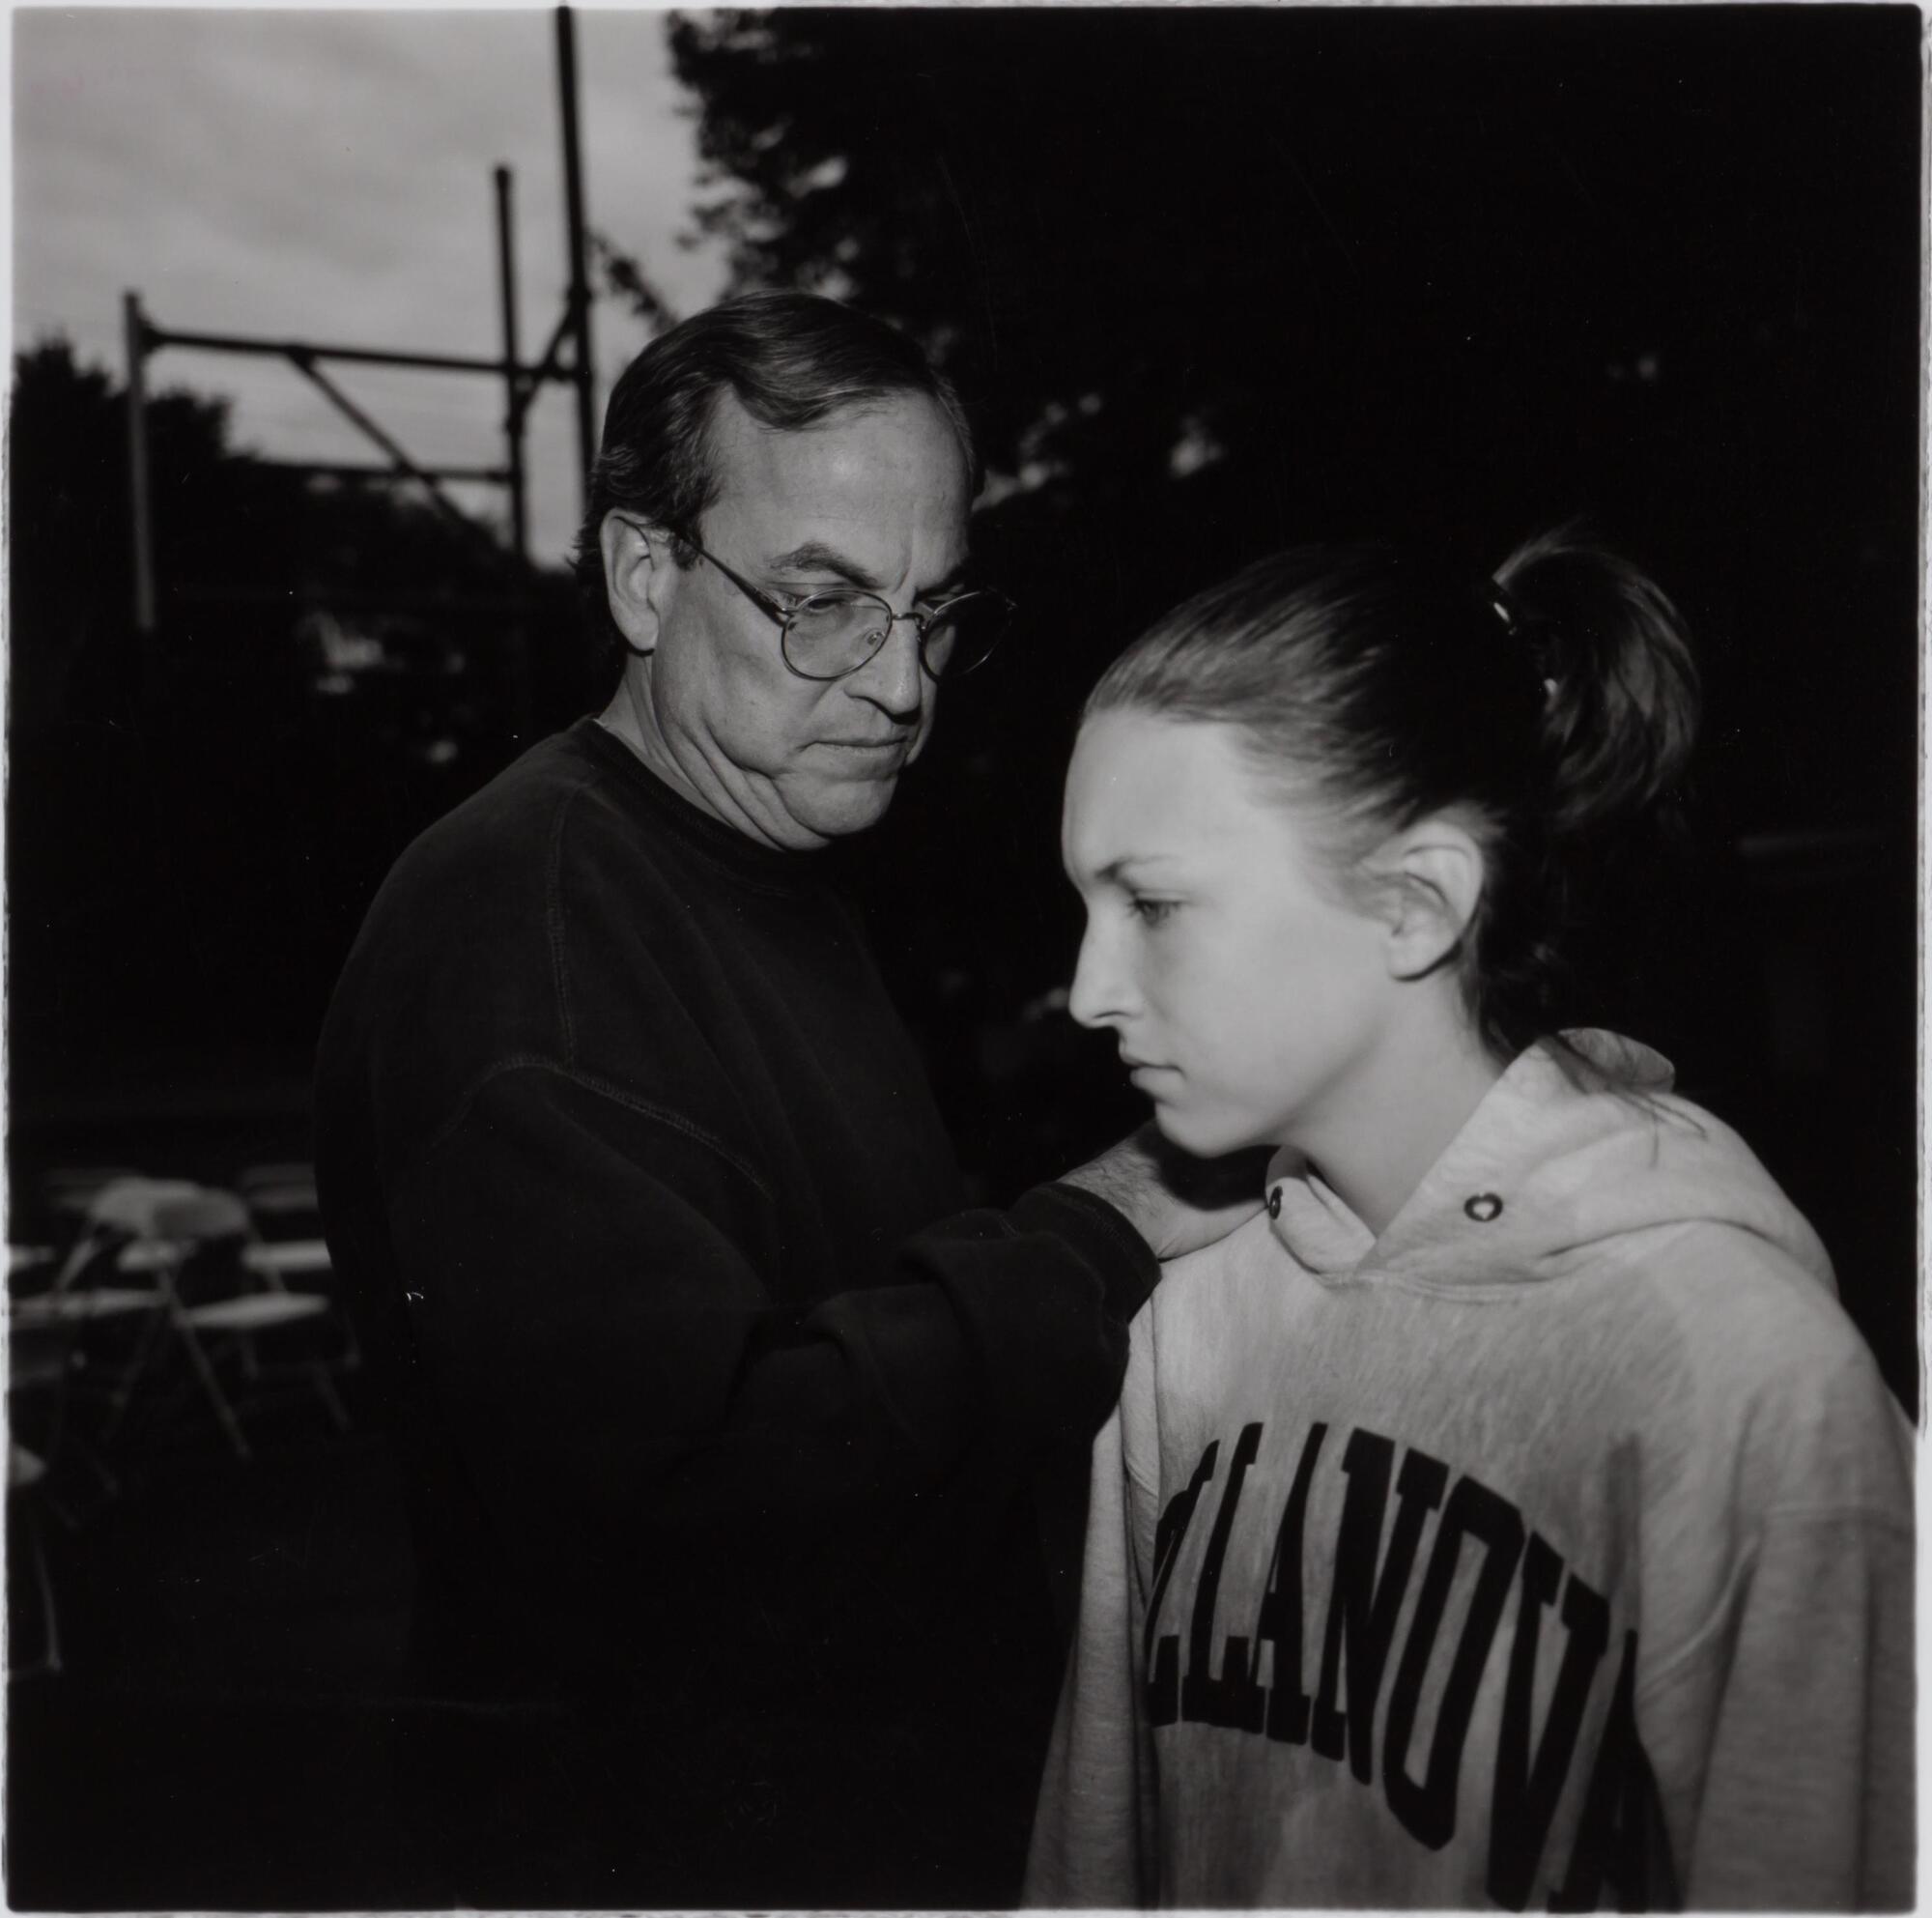 A photograph of a man wearing a dark shirt and glasses,and a young woman wearing a sports sweat shirt. The man turns toward the girl, placing his hand on her shoulder. Both have solemn expressions.